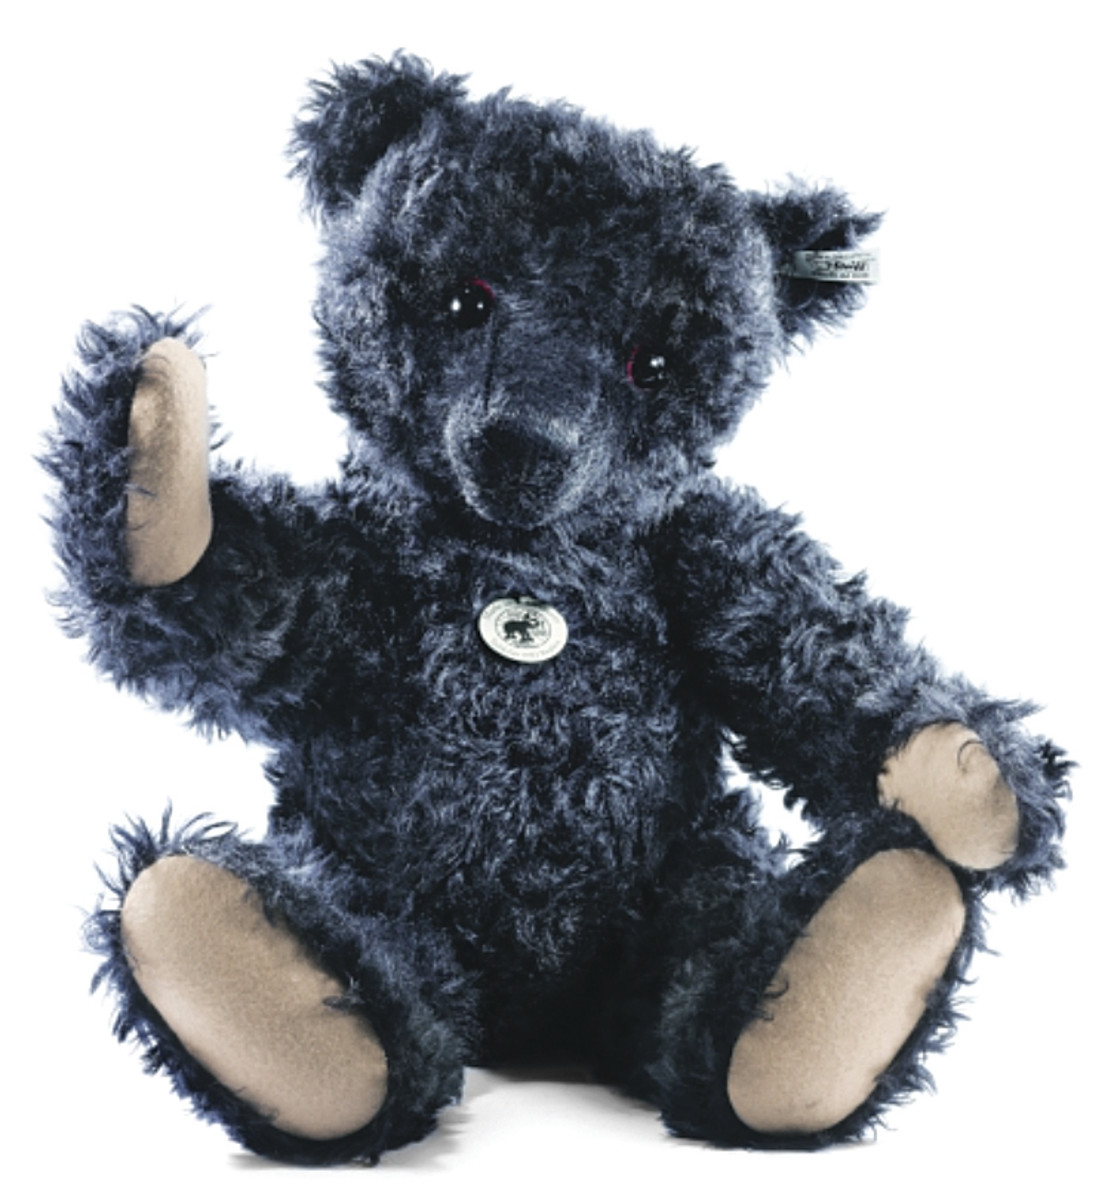 A replica of the famous black Titanic Mourning Teddy Bear by Steiff.